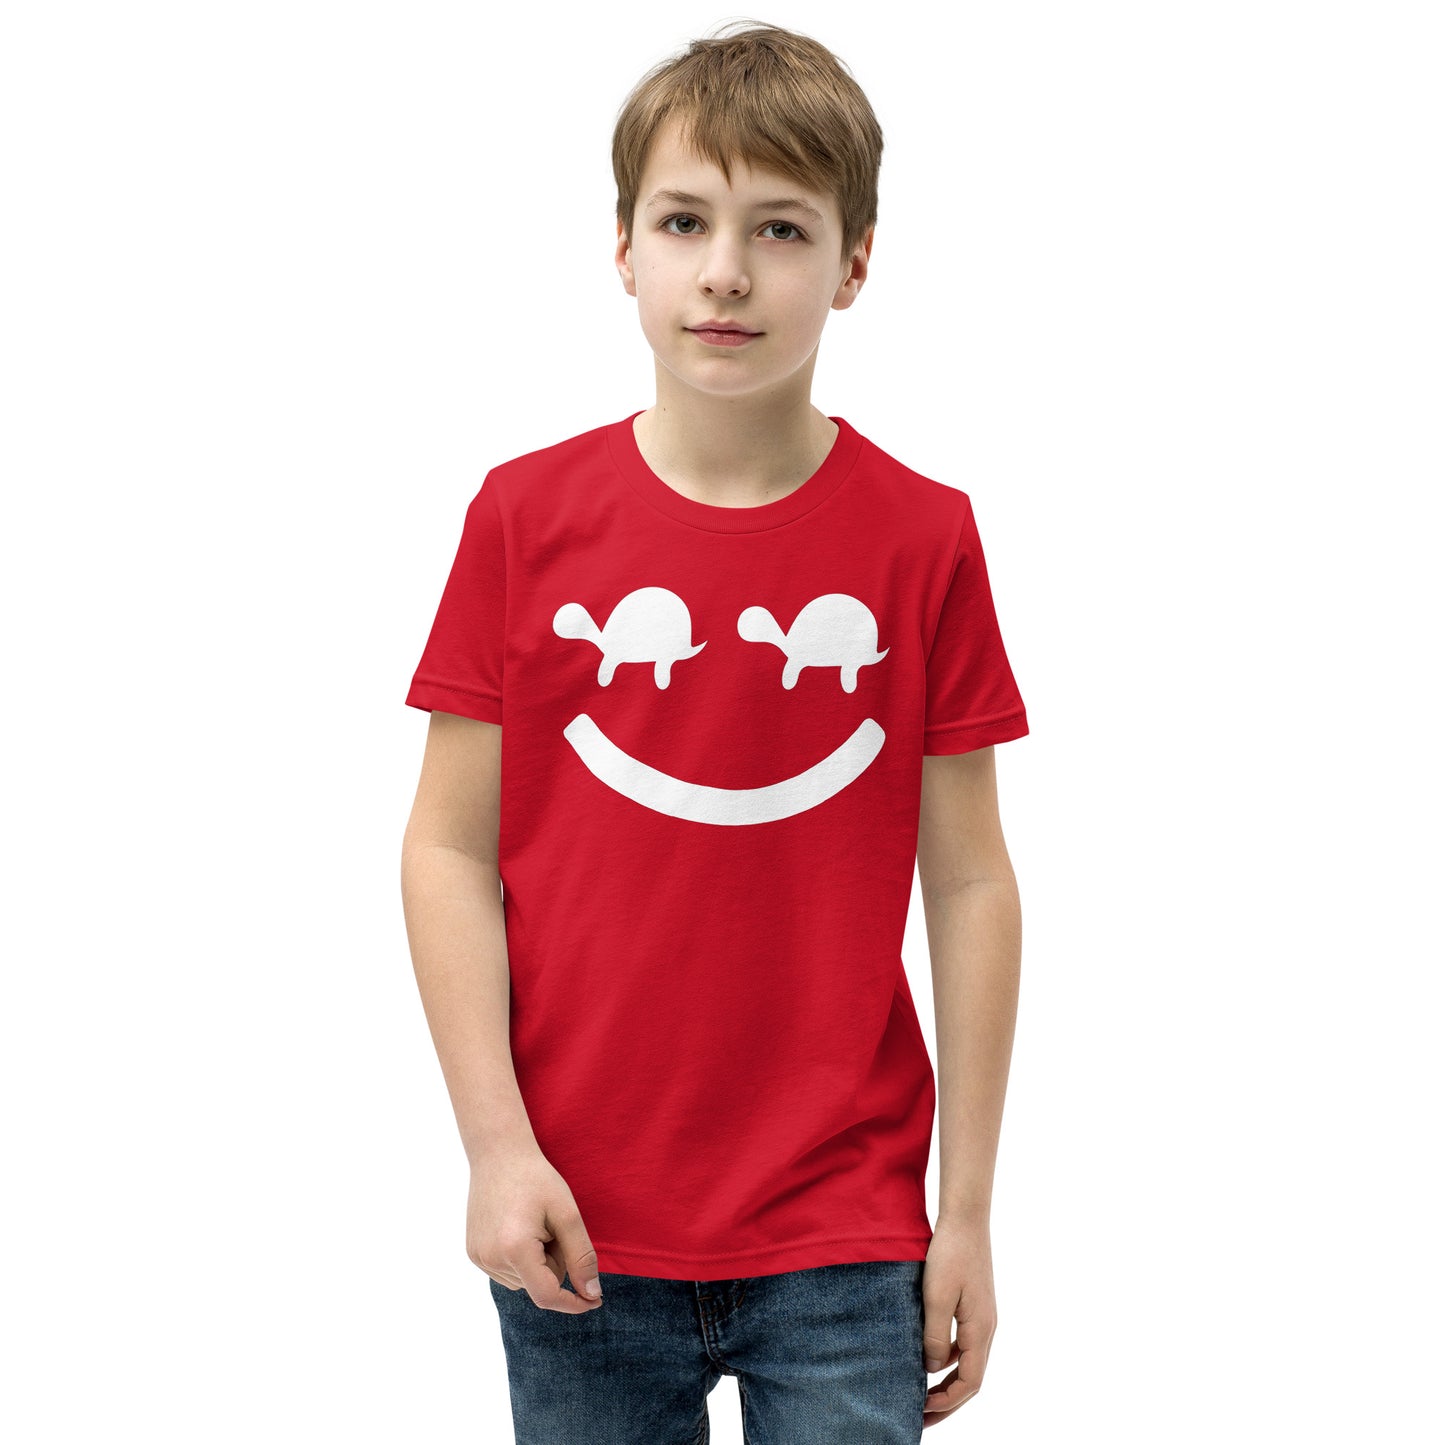 Turtle Face Kids Tee - Red/White